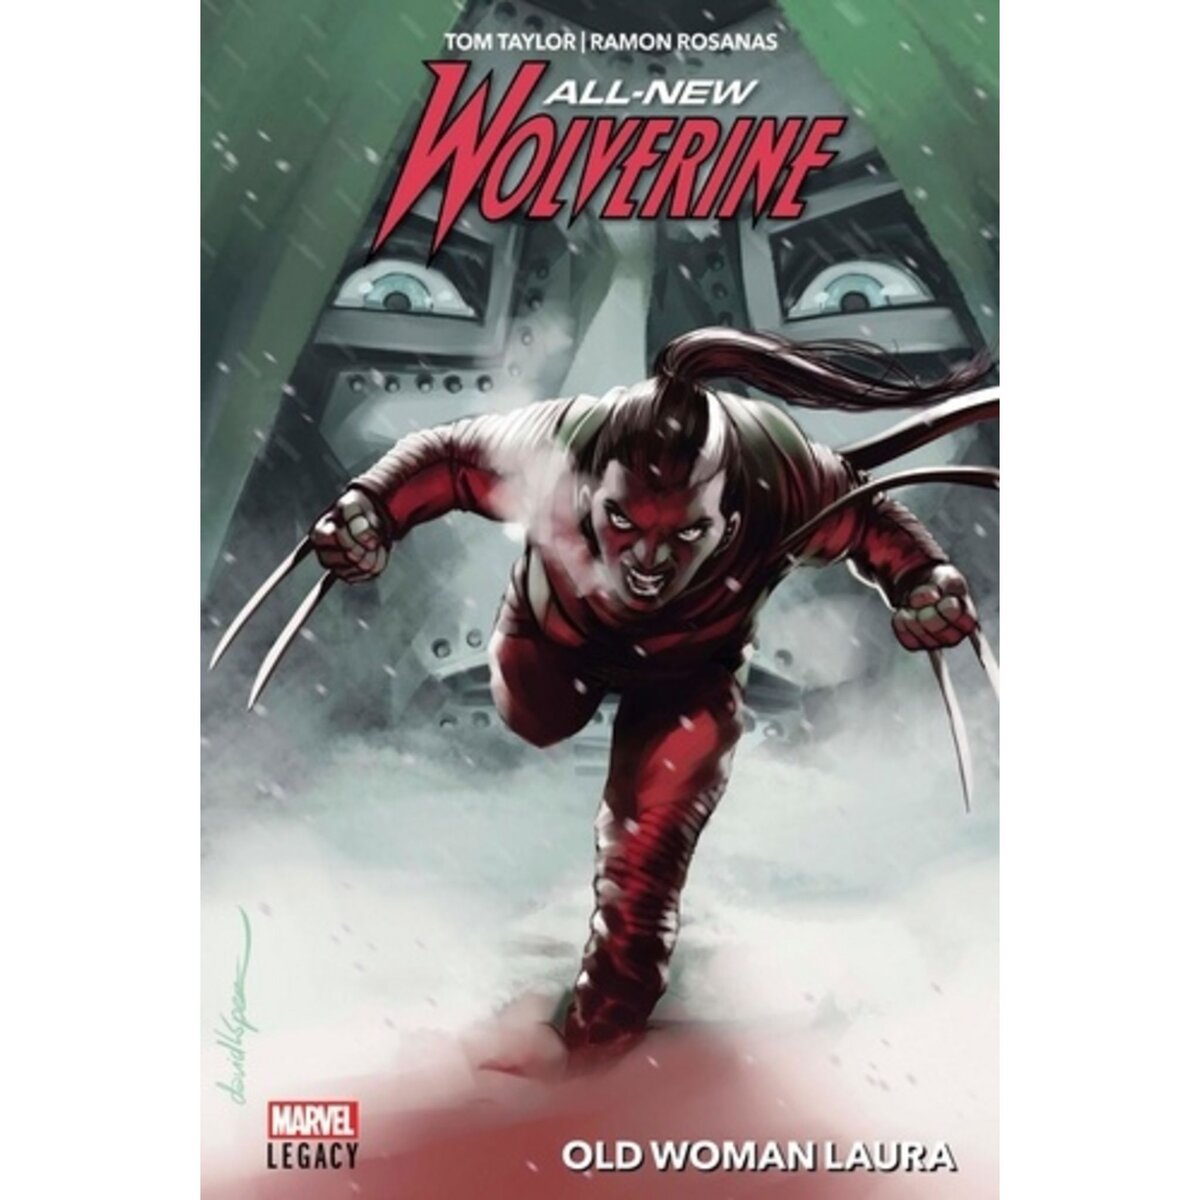  ALL-NEW WOLVERINE TOME 2 : OLD WOMAN LAURA, Taylor Tom